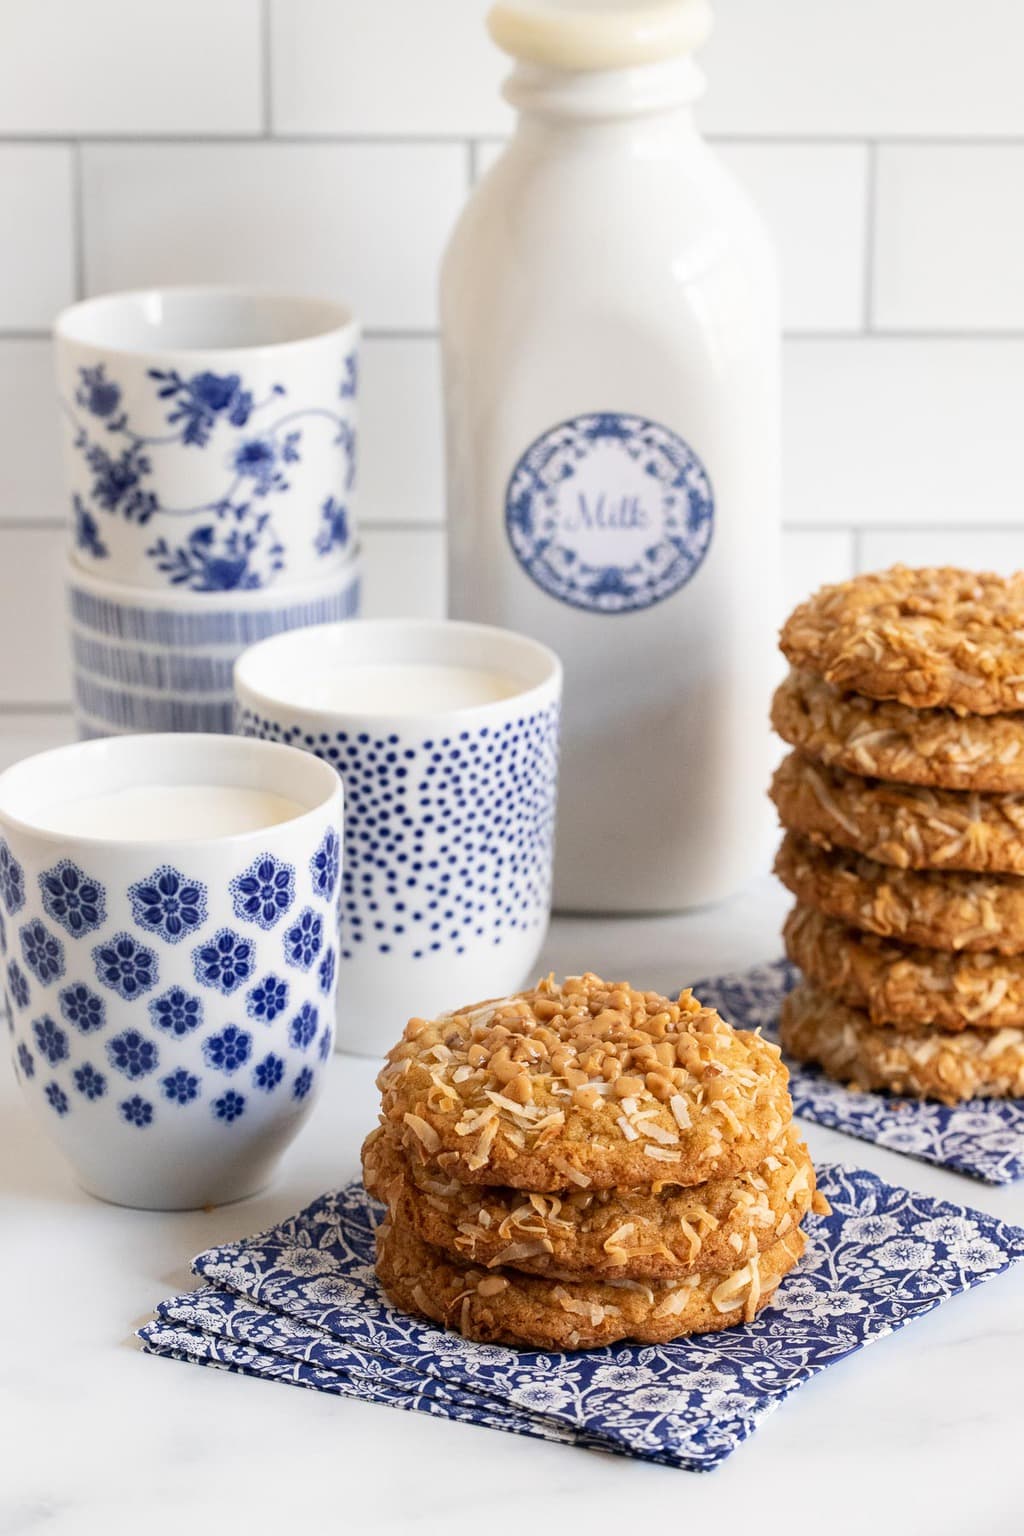 Vertical photo of stacks of Crispy Chewy Carolina Coconut Cookies on blue and white patterned napkins with cups and a bottle of milk in the background.